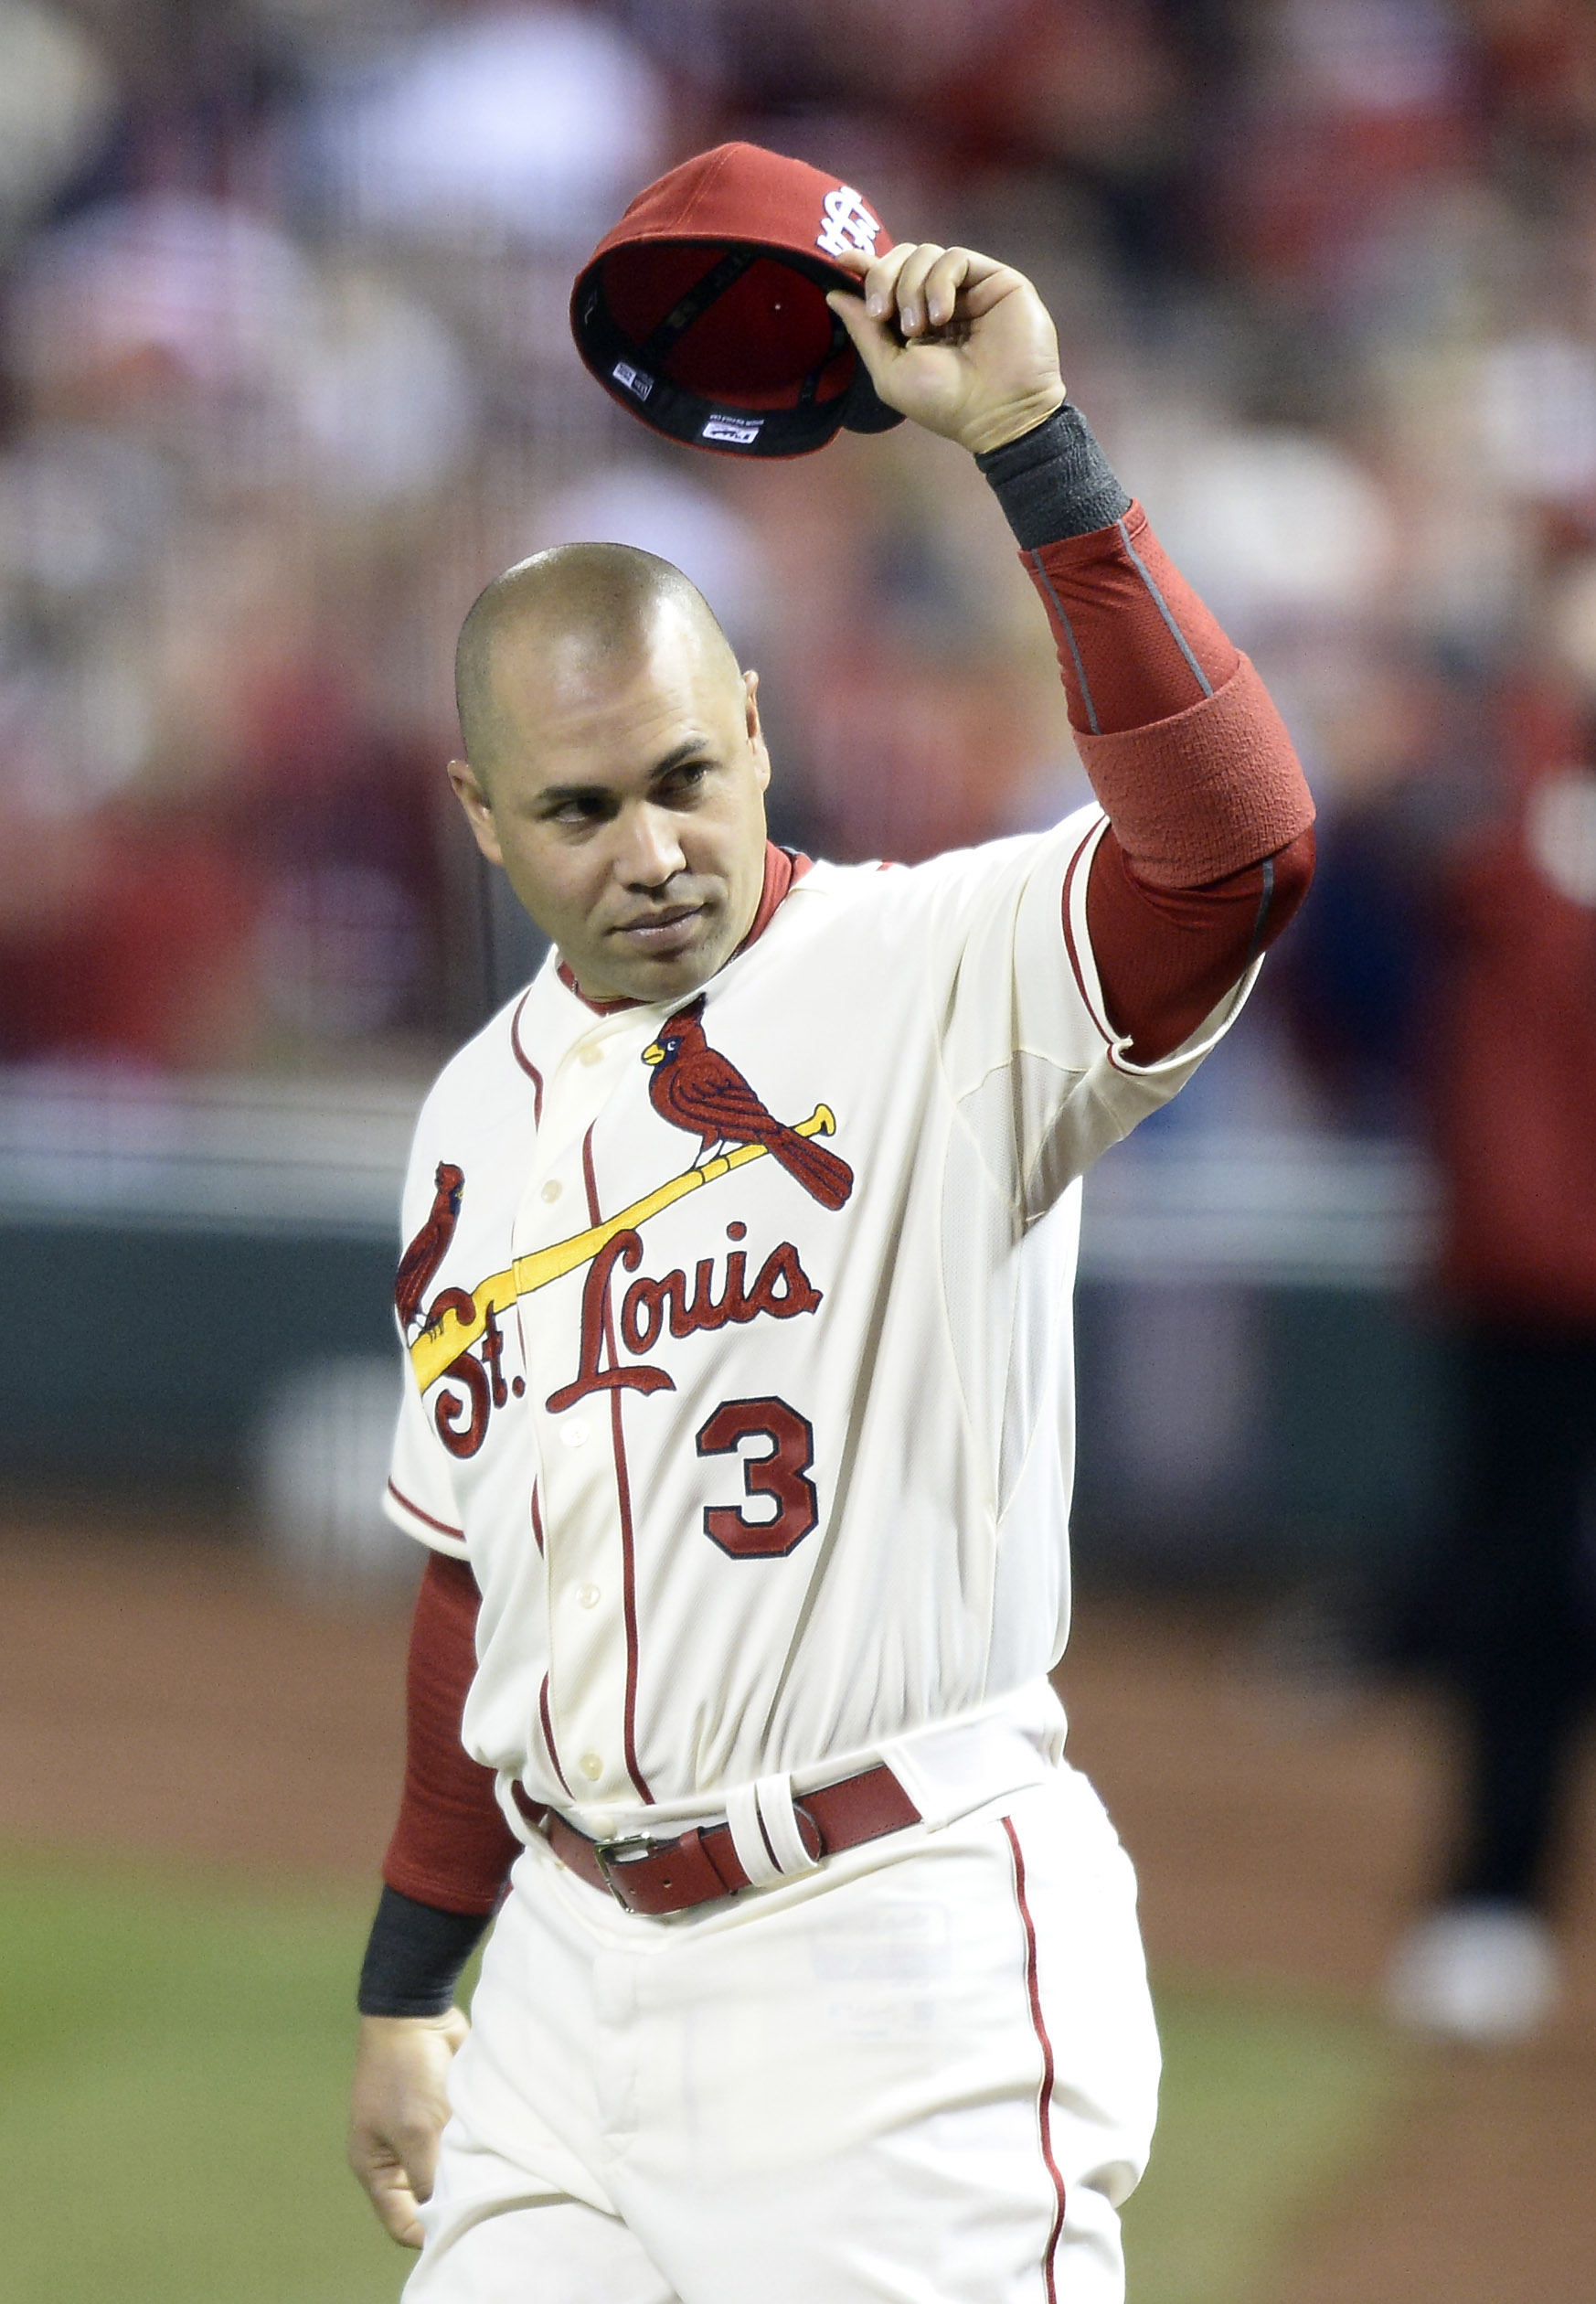 Report: The Yankees Don't Consider Carlos Beltran a Fit